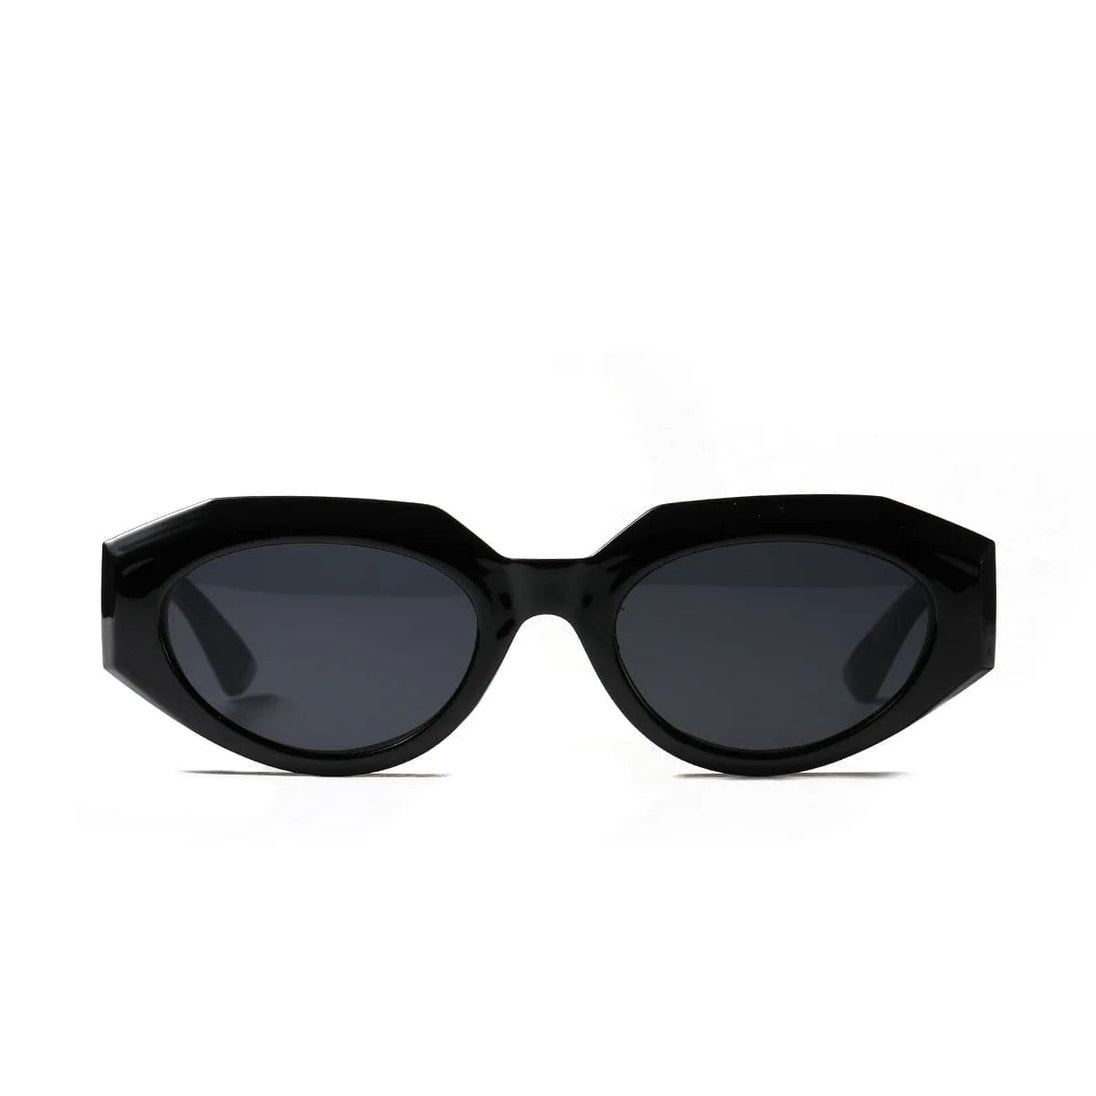 Candy Color Square Sunglasses: Small Triangle Frames with Fashion Leopard Print - Stylish Eye Cat Sun Shades for Ladies